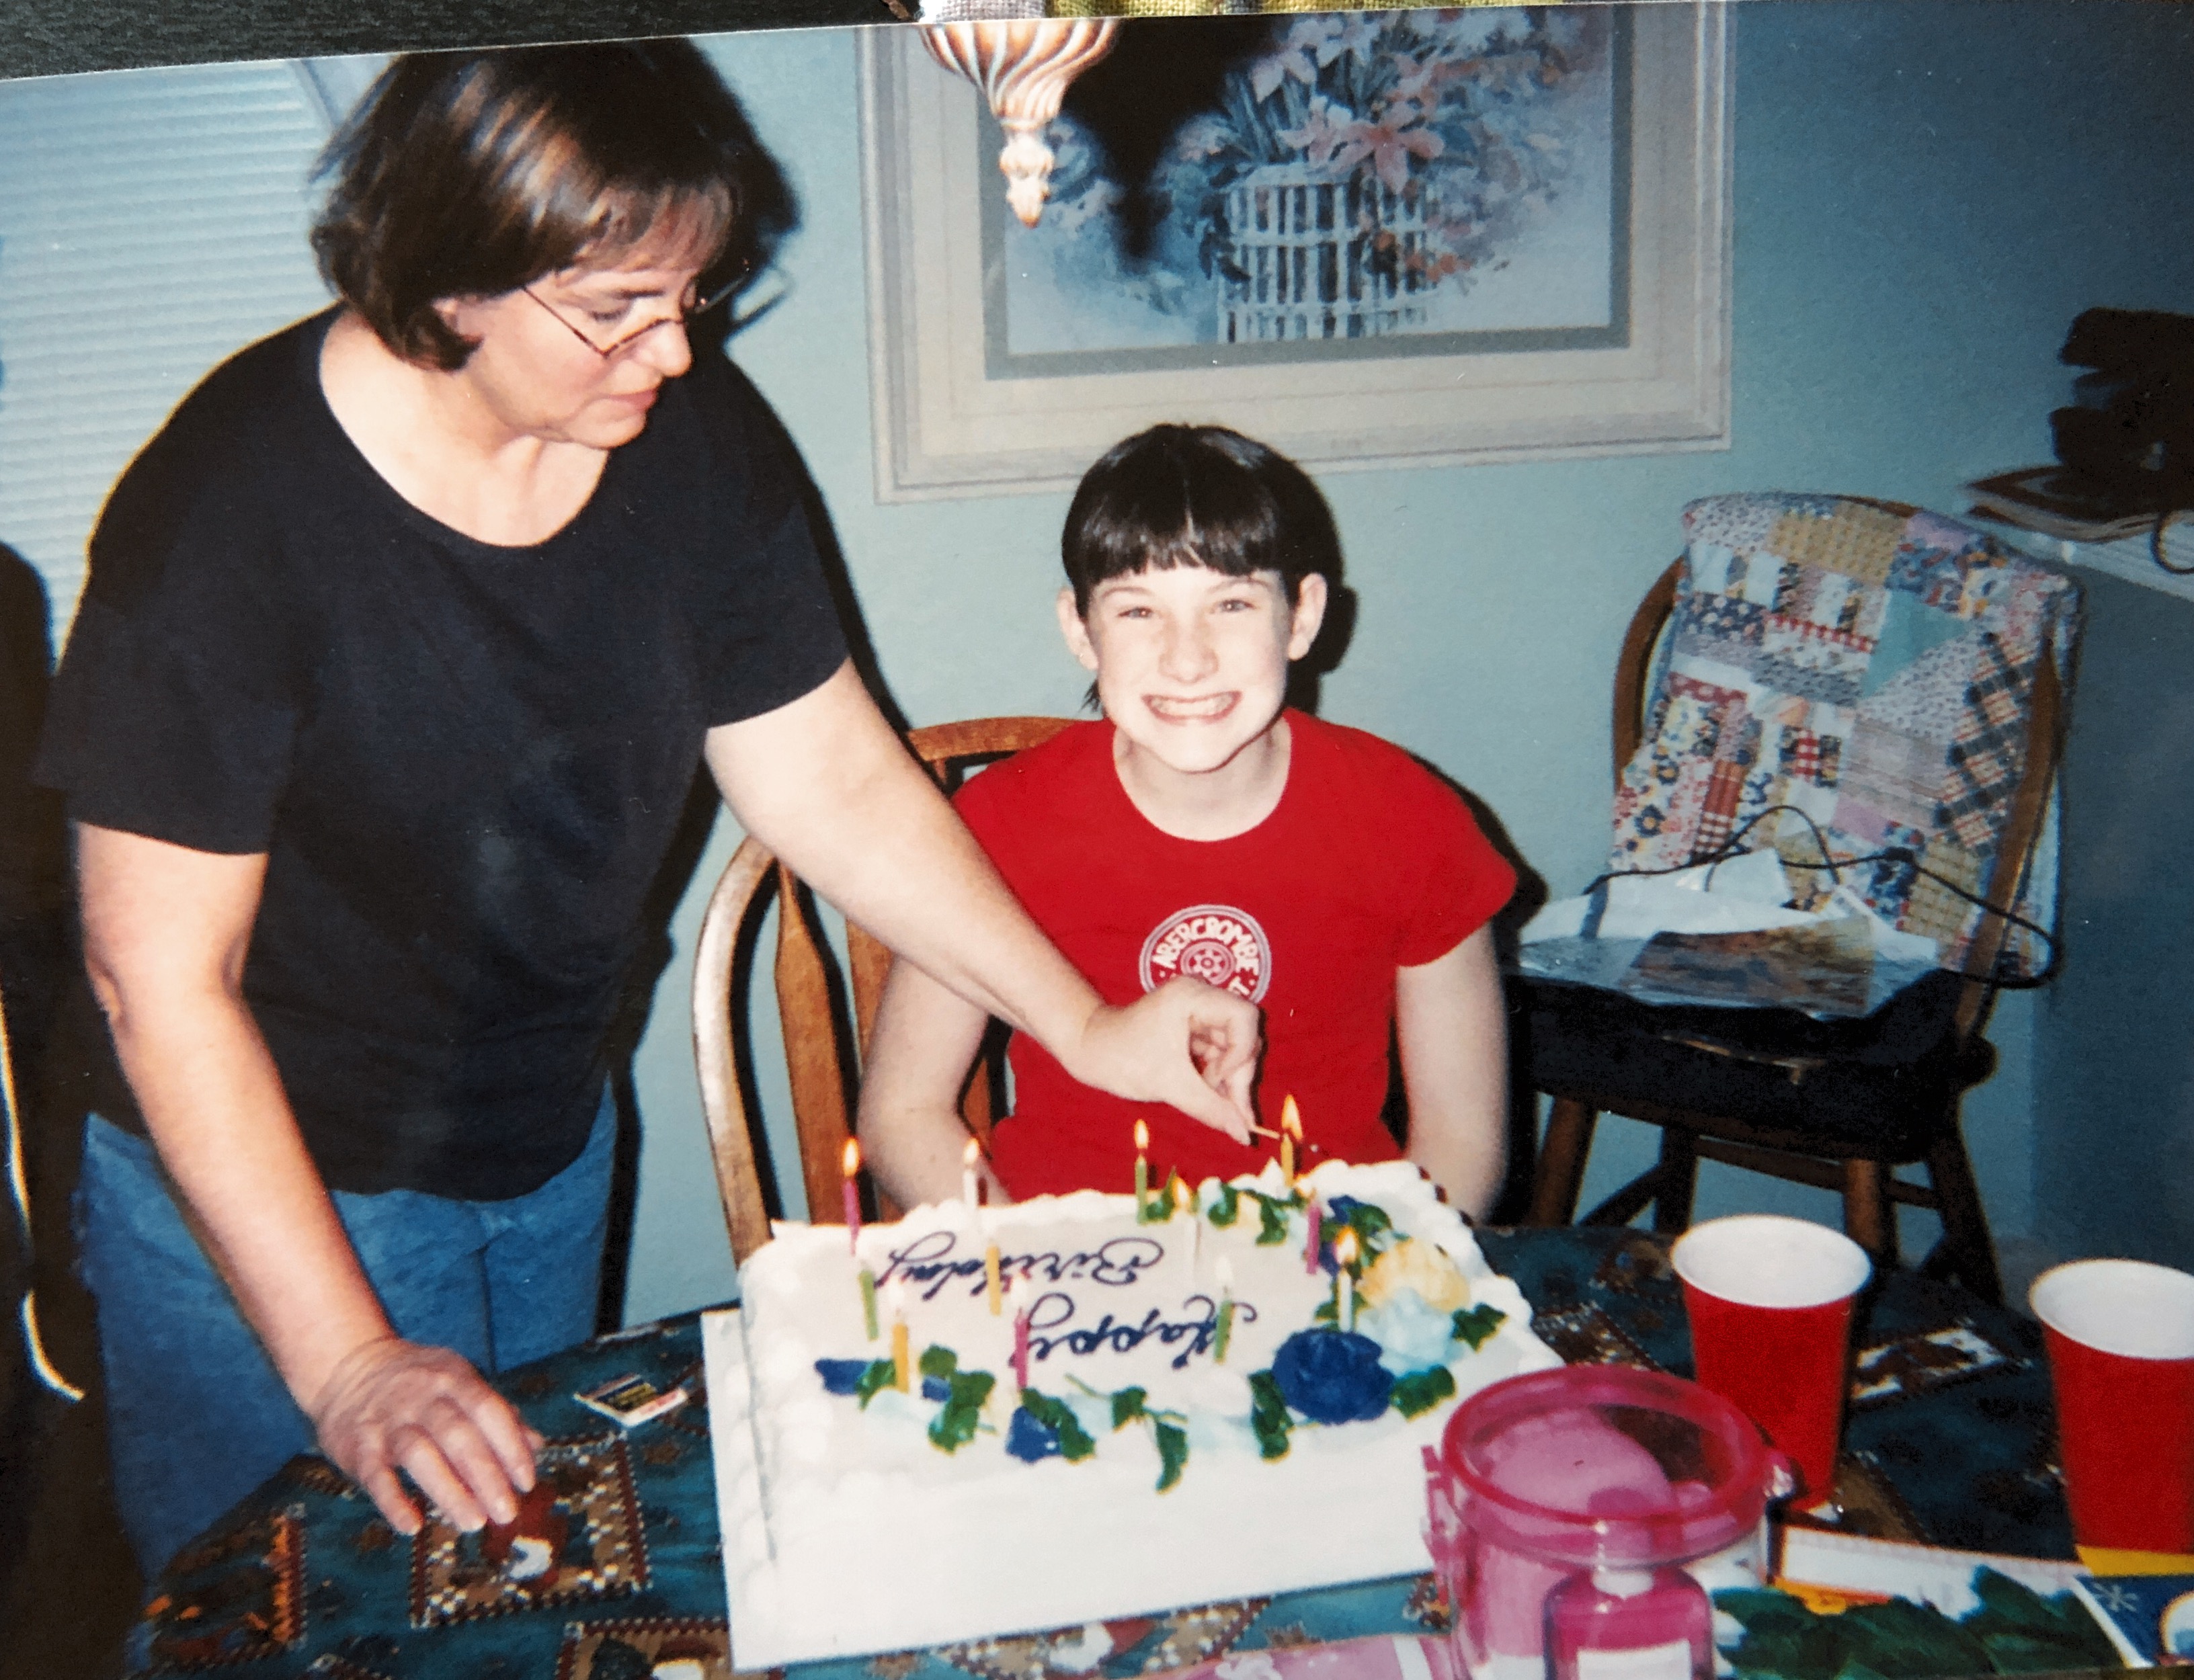 Mom (Rene), birthday girl  Christina with Jimmy looking on.  The Branches!!  Looks like there are 12 candles.  Dec. 16, 2002.  At home in Federal Way.  Great smile!